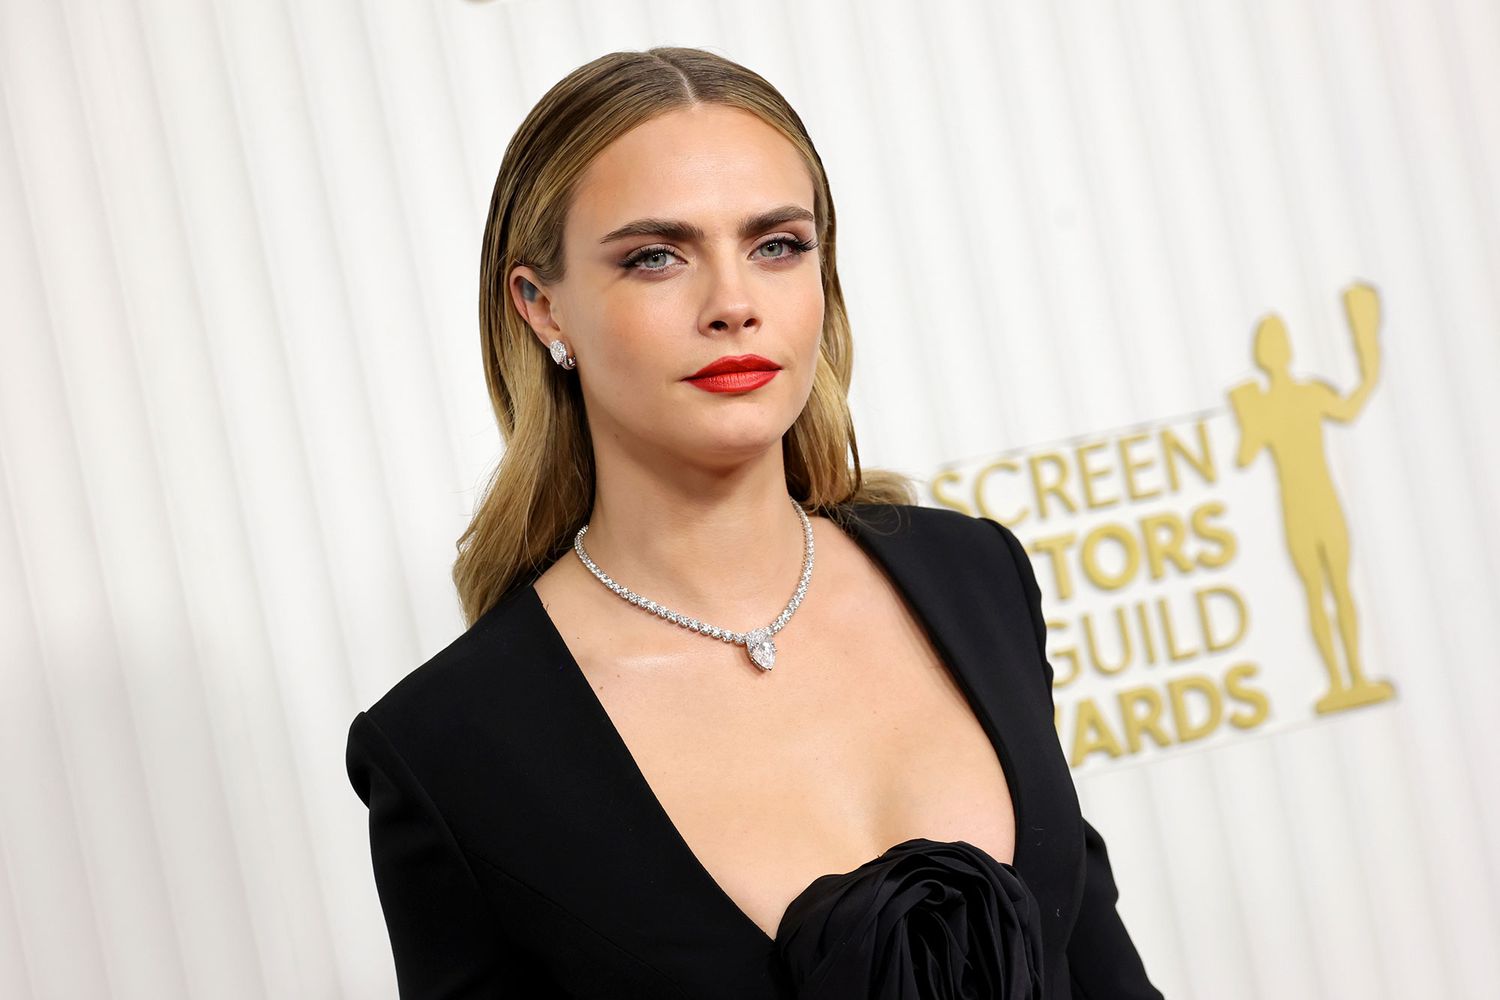 Cara Delevingne attends the 29th Annual Screen Actors Guild Awards at Fairmont Century Plaza on February 26, 2023 in Los Angeles, California.